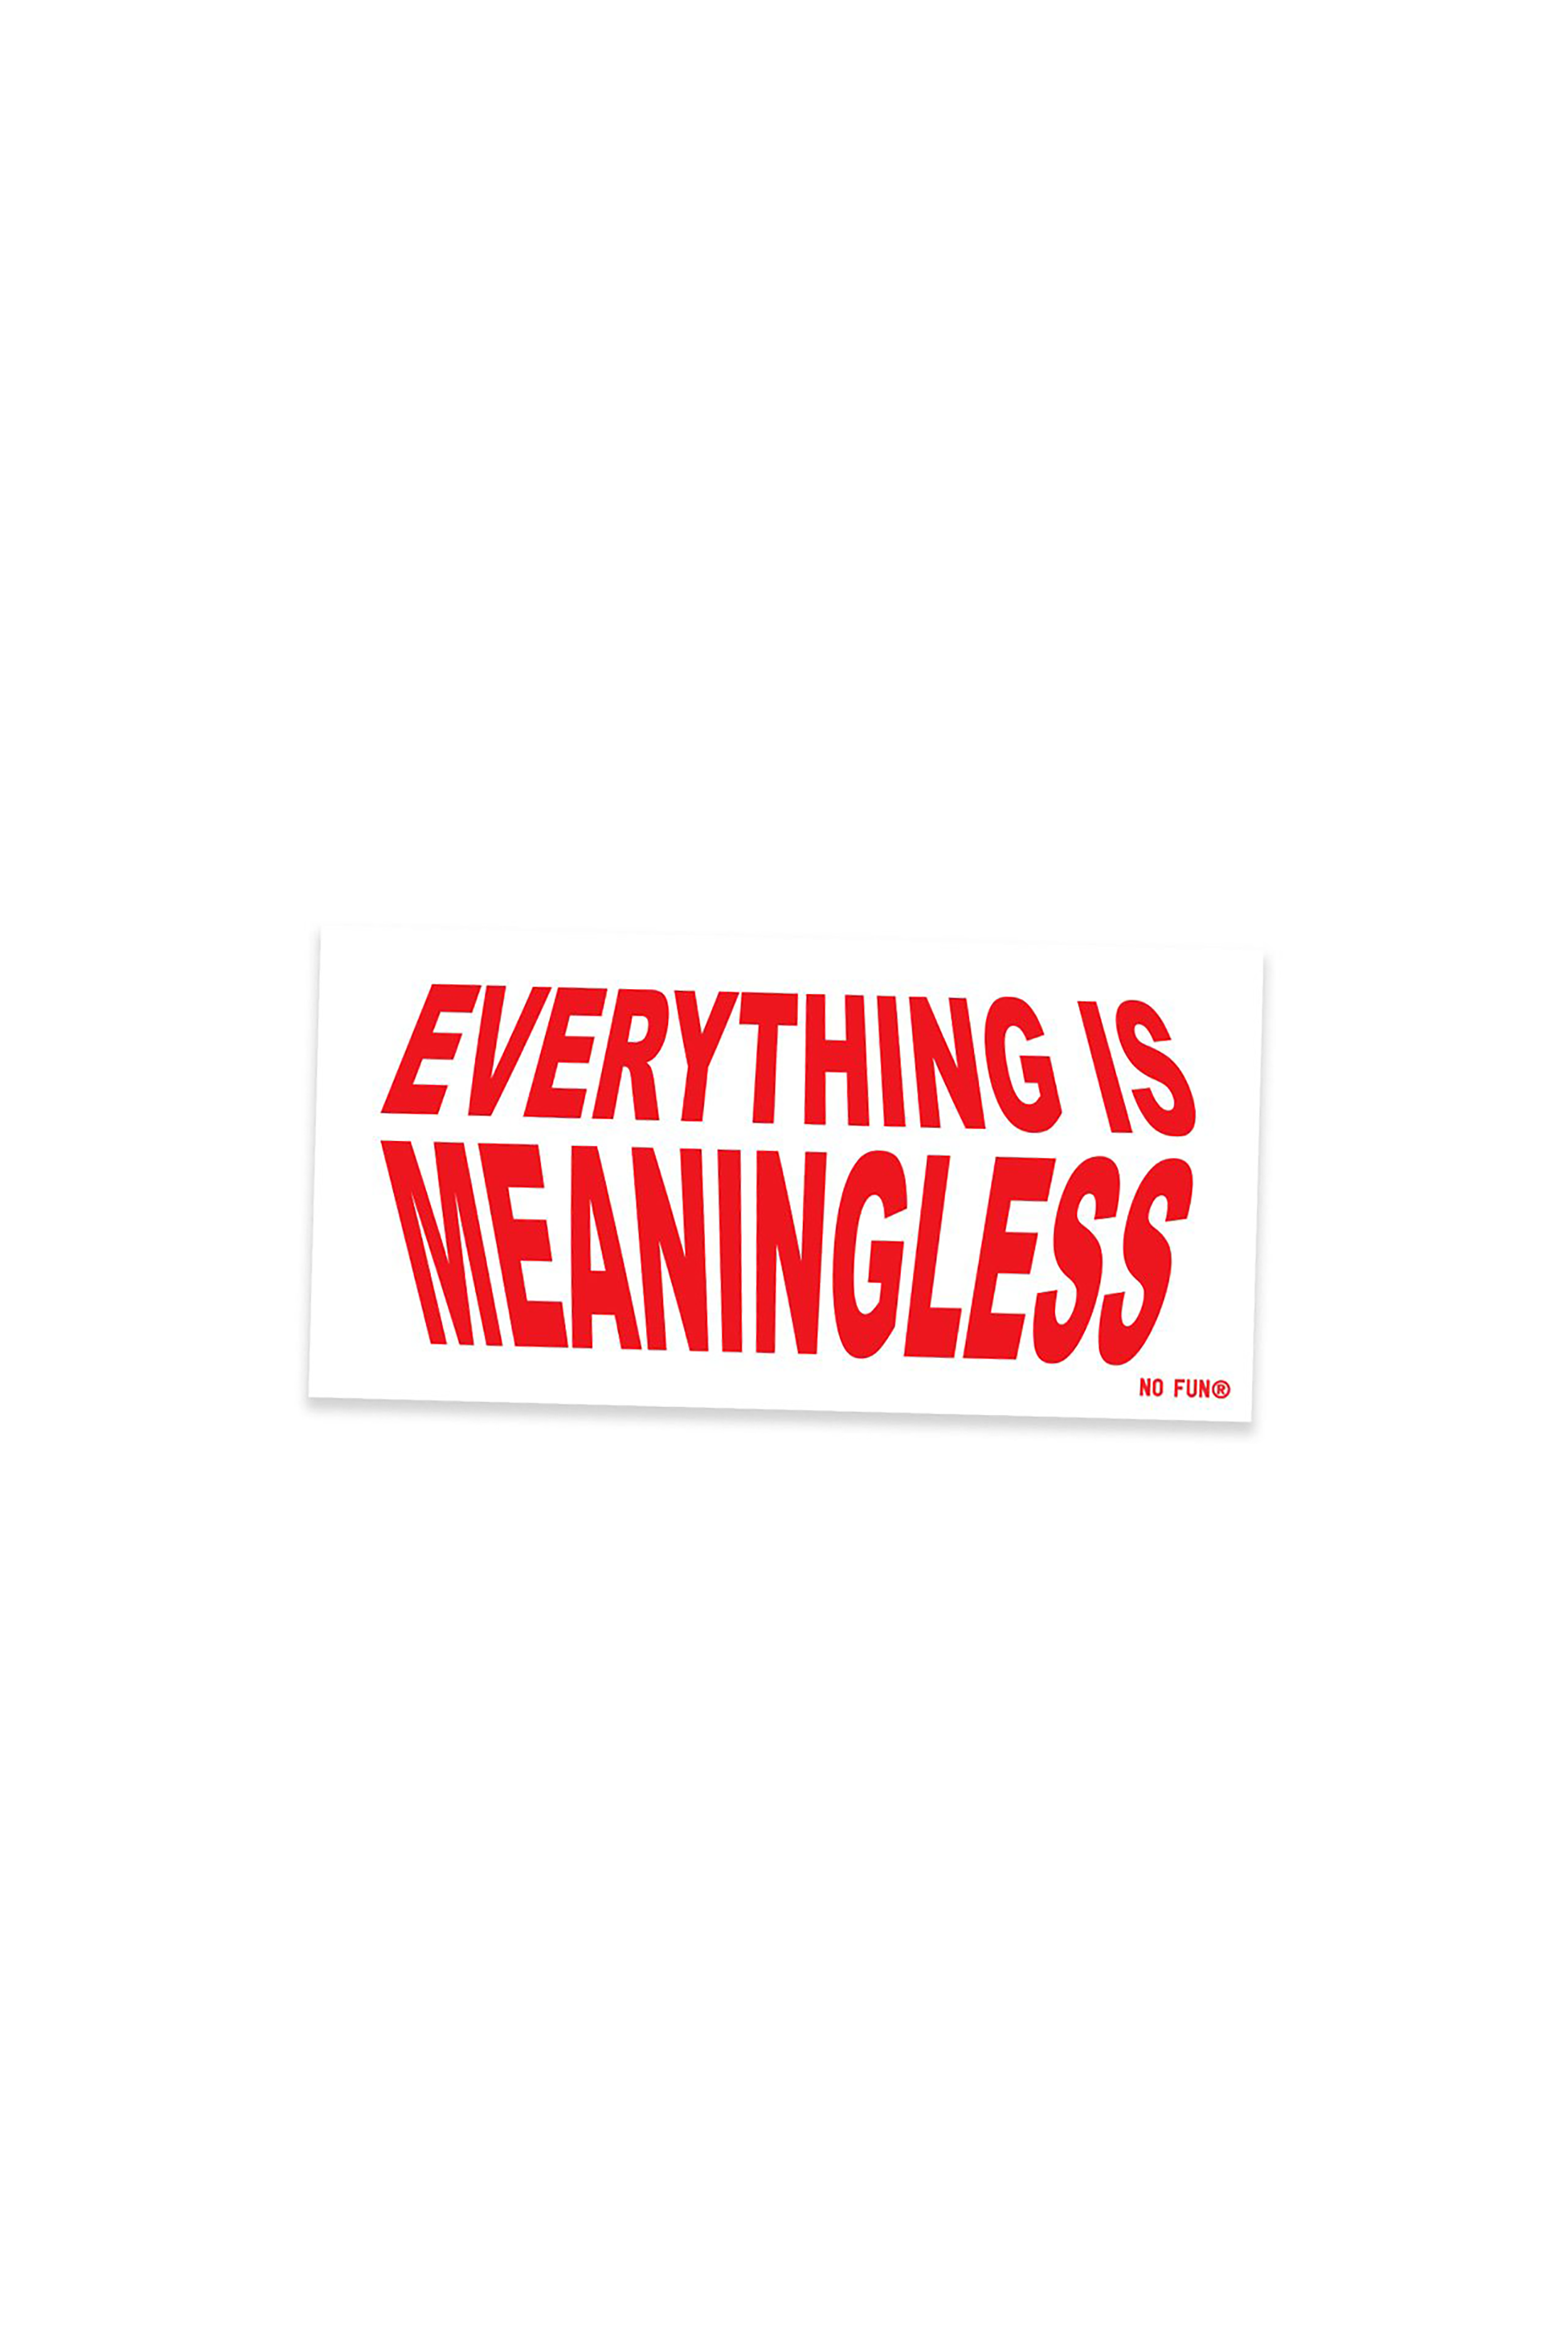 Everything is Meaningless Bumper Sticker